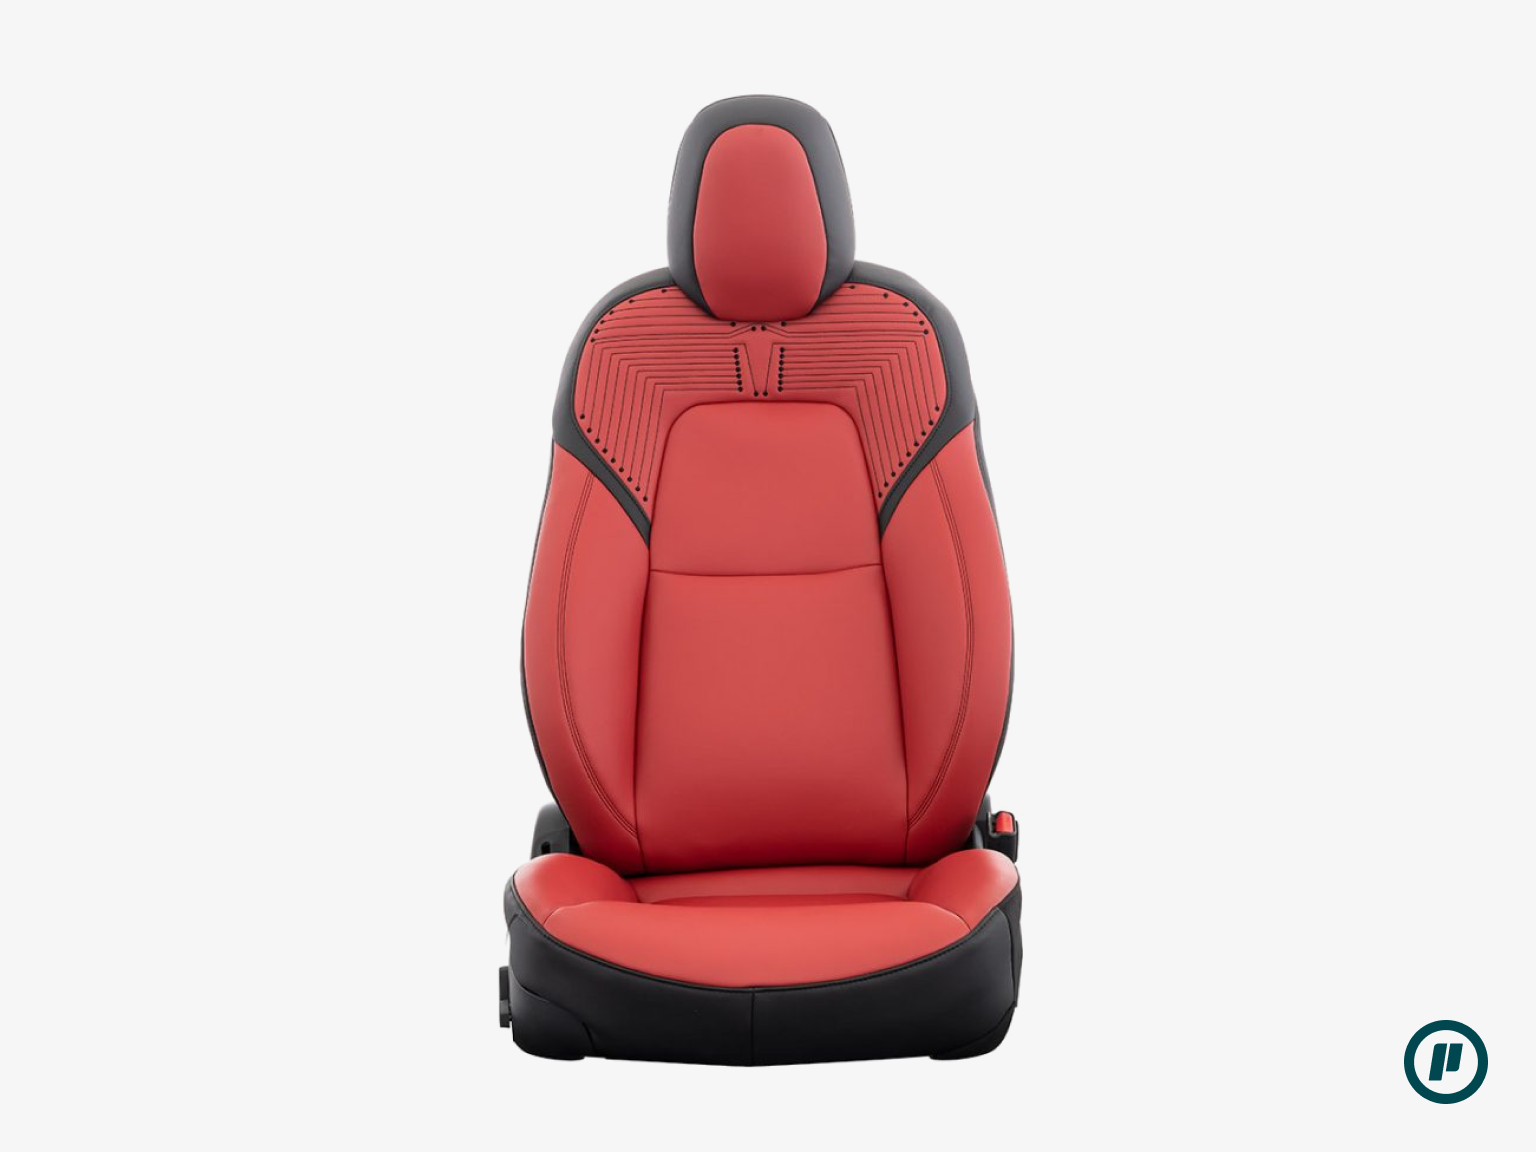 Startech Seat Covers made of Vegan Leather for Tesla Model 3 (2017+)